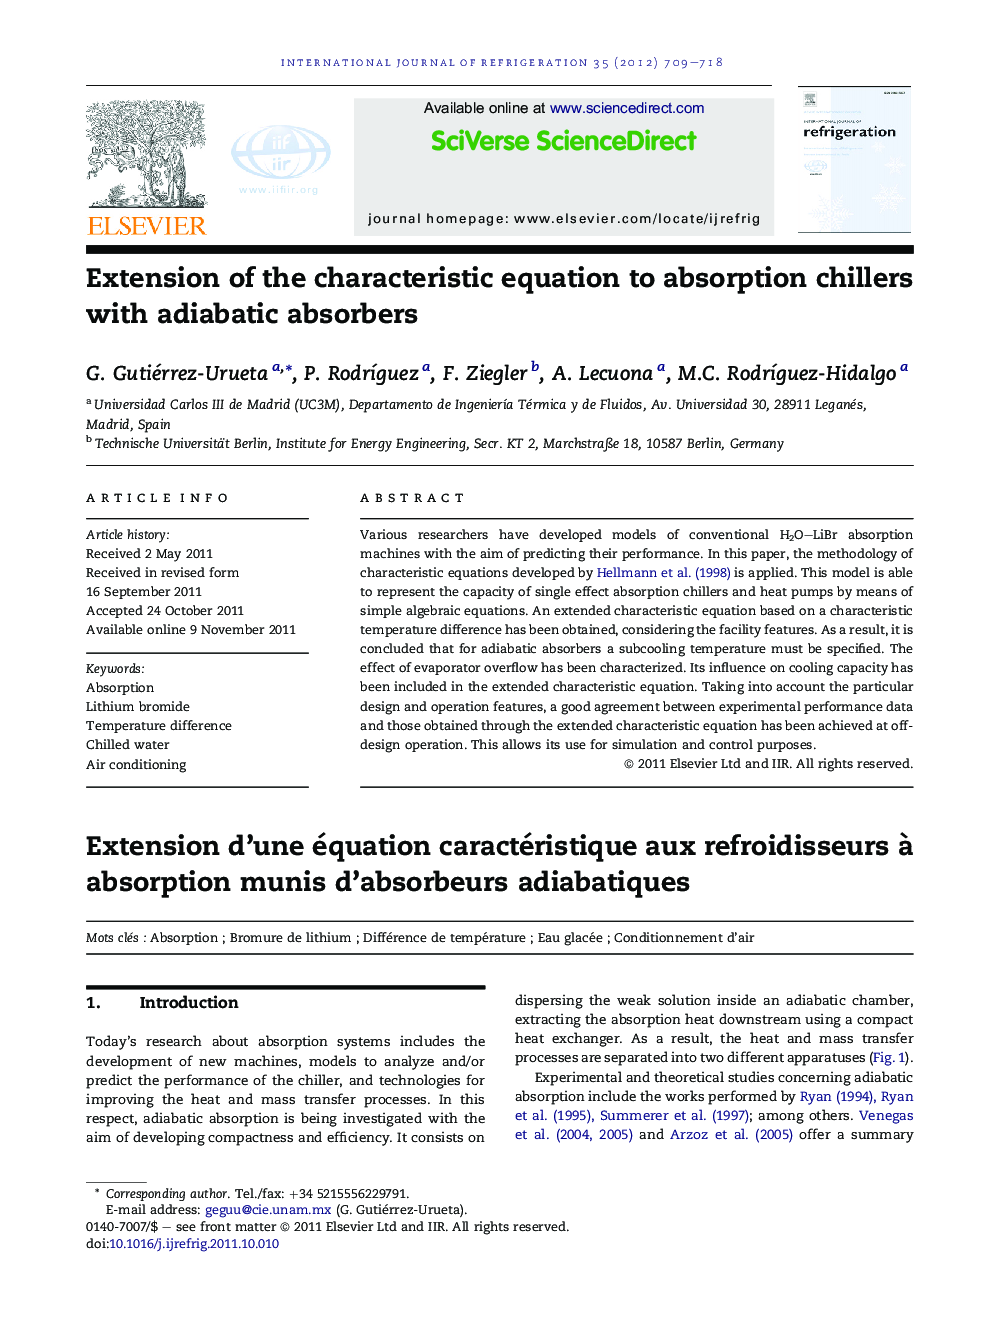 Extension of the characteristic equation to absorption chillers with adiabatic absorbers